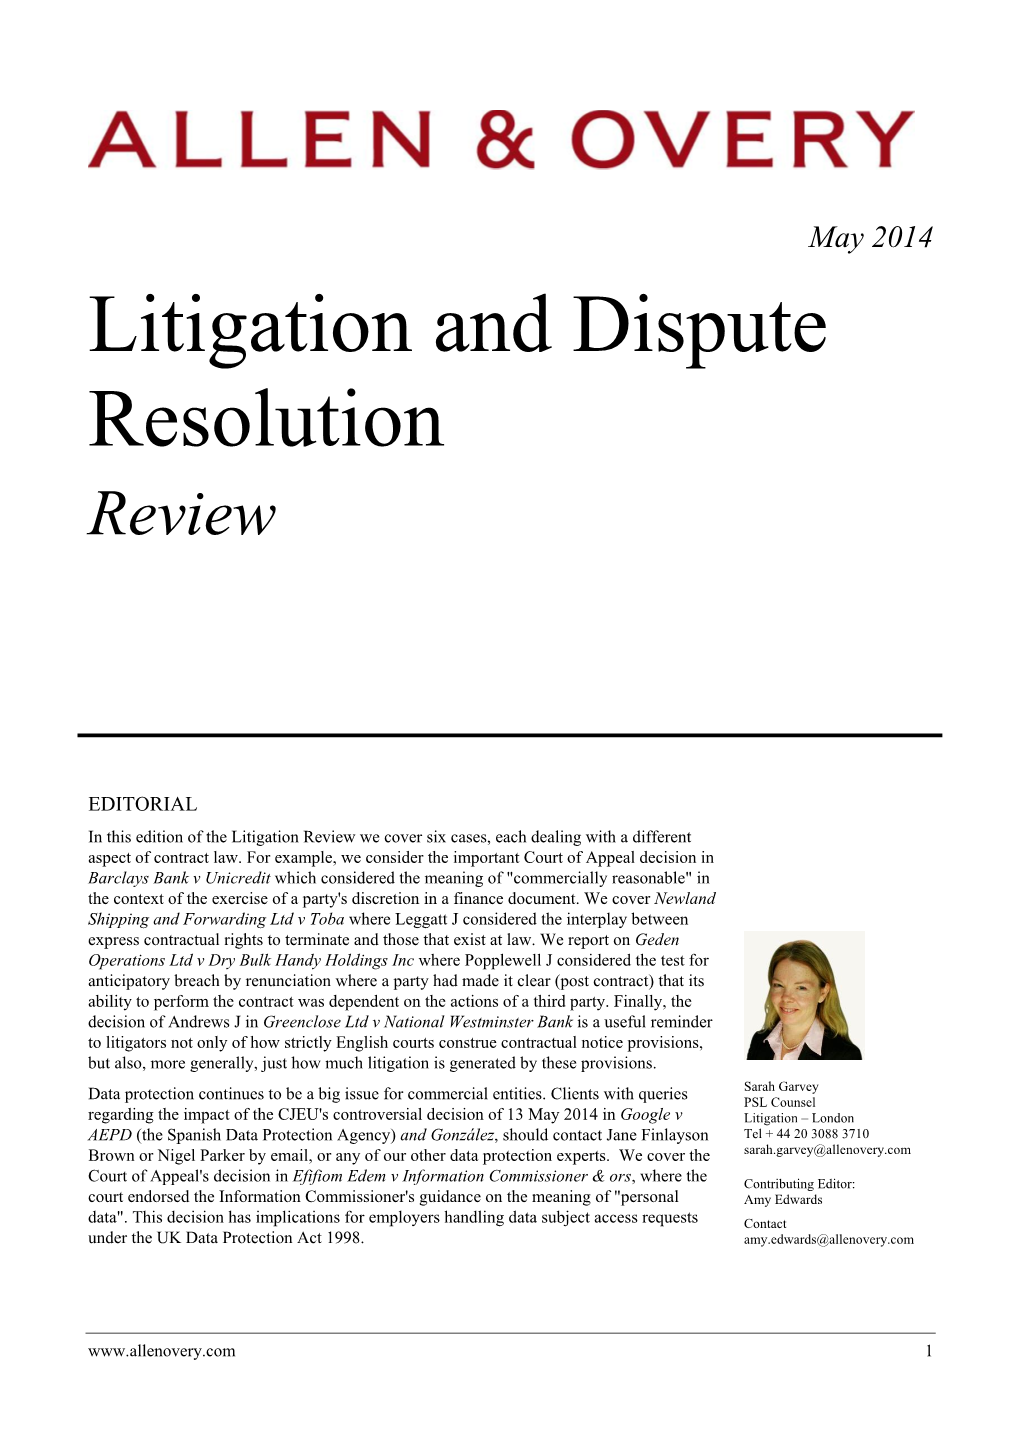 May 2014 Litigation and Dispute Resolution Review